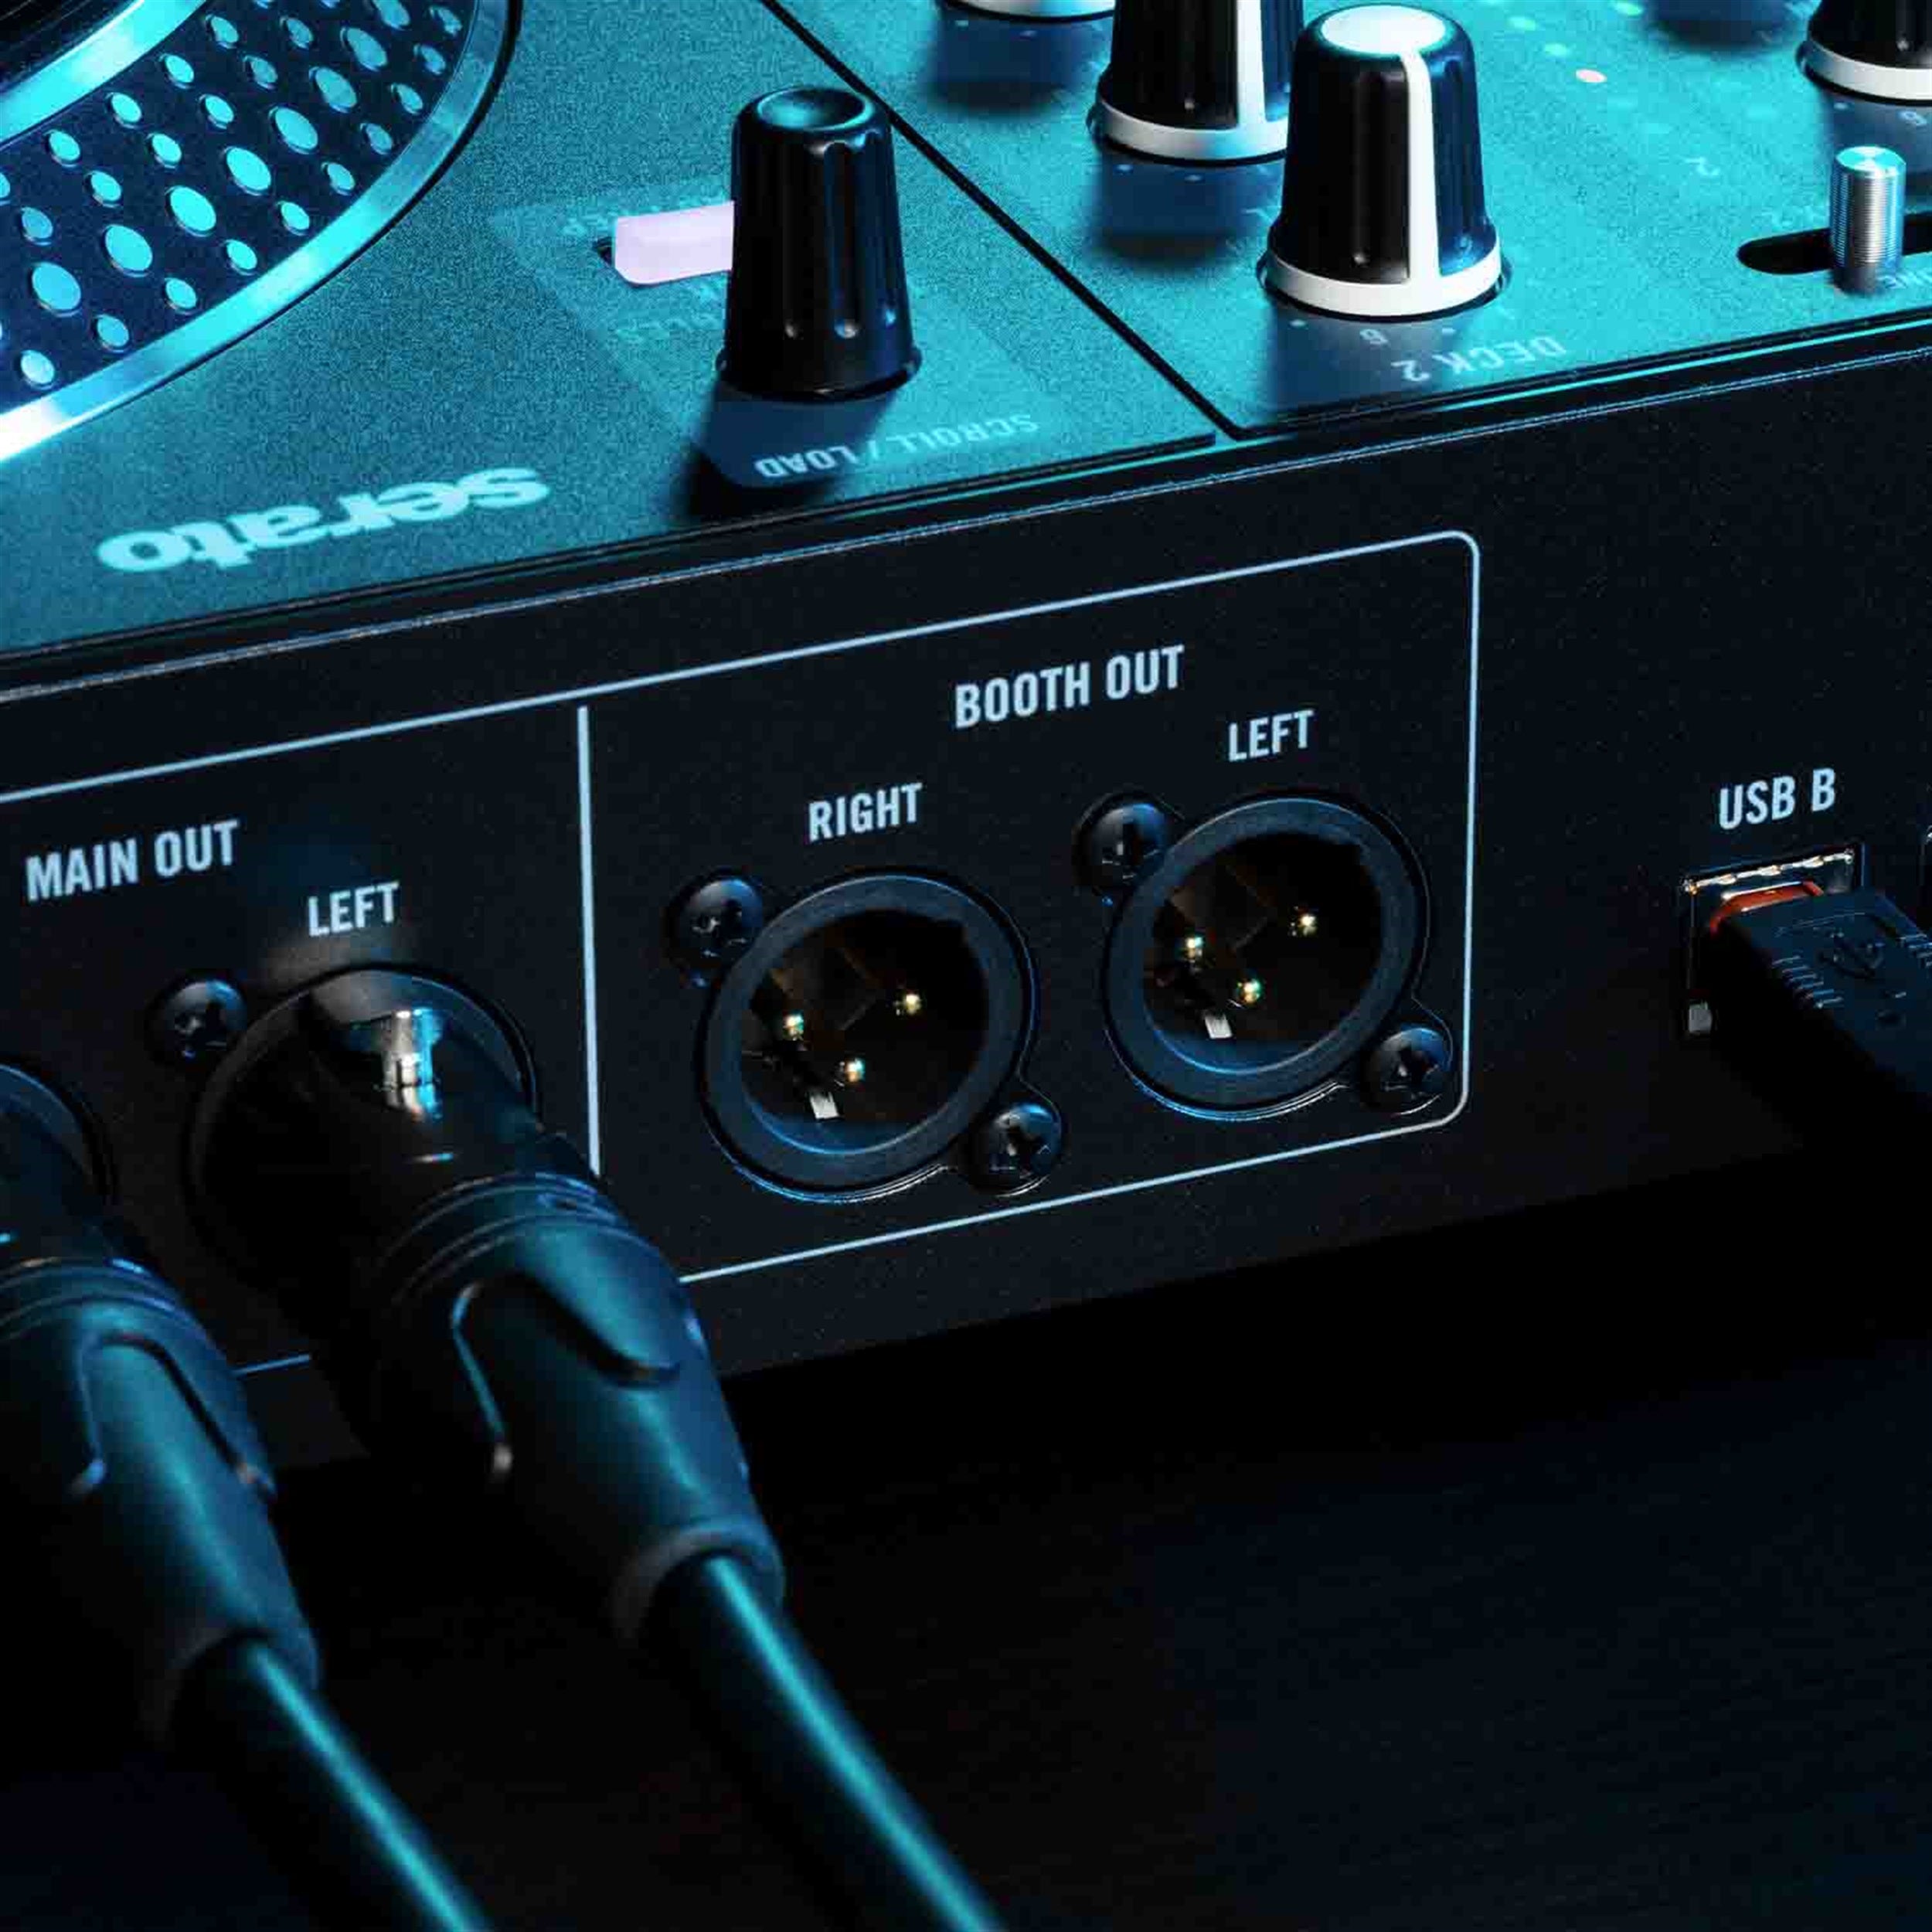 OPEN BOX: RANE ONE 2-Channel DJ Controller - Complete DJ Set and DJ Controller for Serato DJ with Integrated DJ Mixer, Motorized Platters and Serato DJ Pro Included by RANE DJ